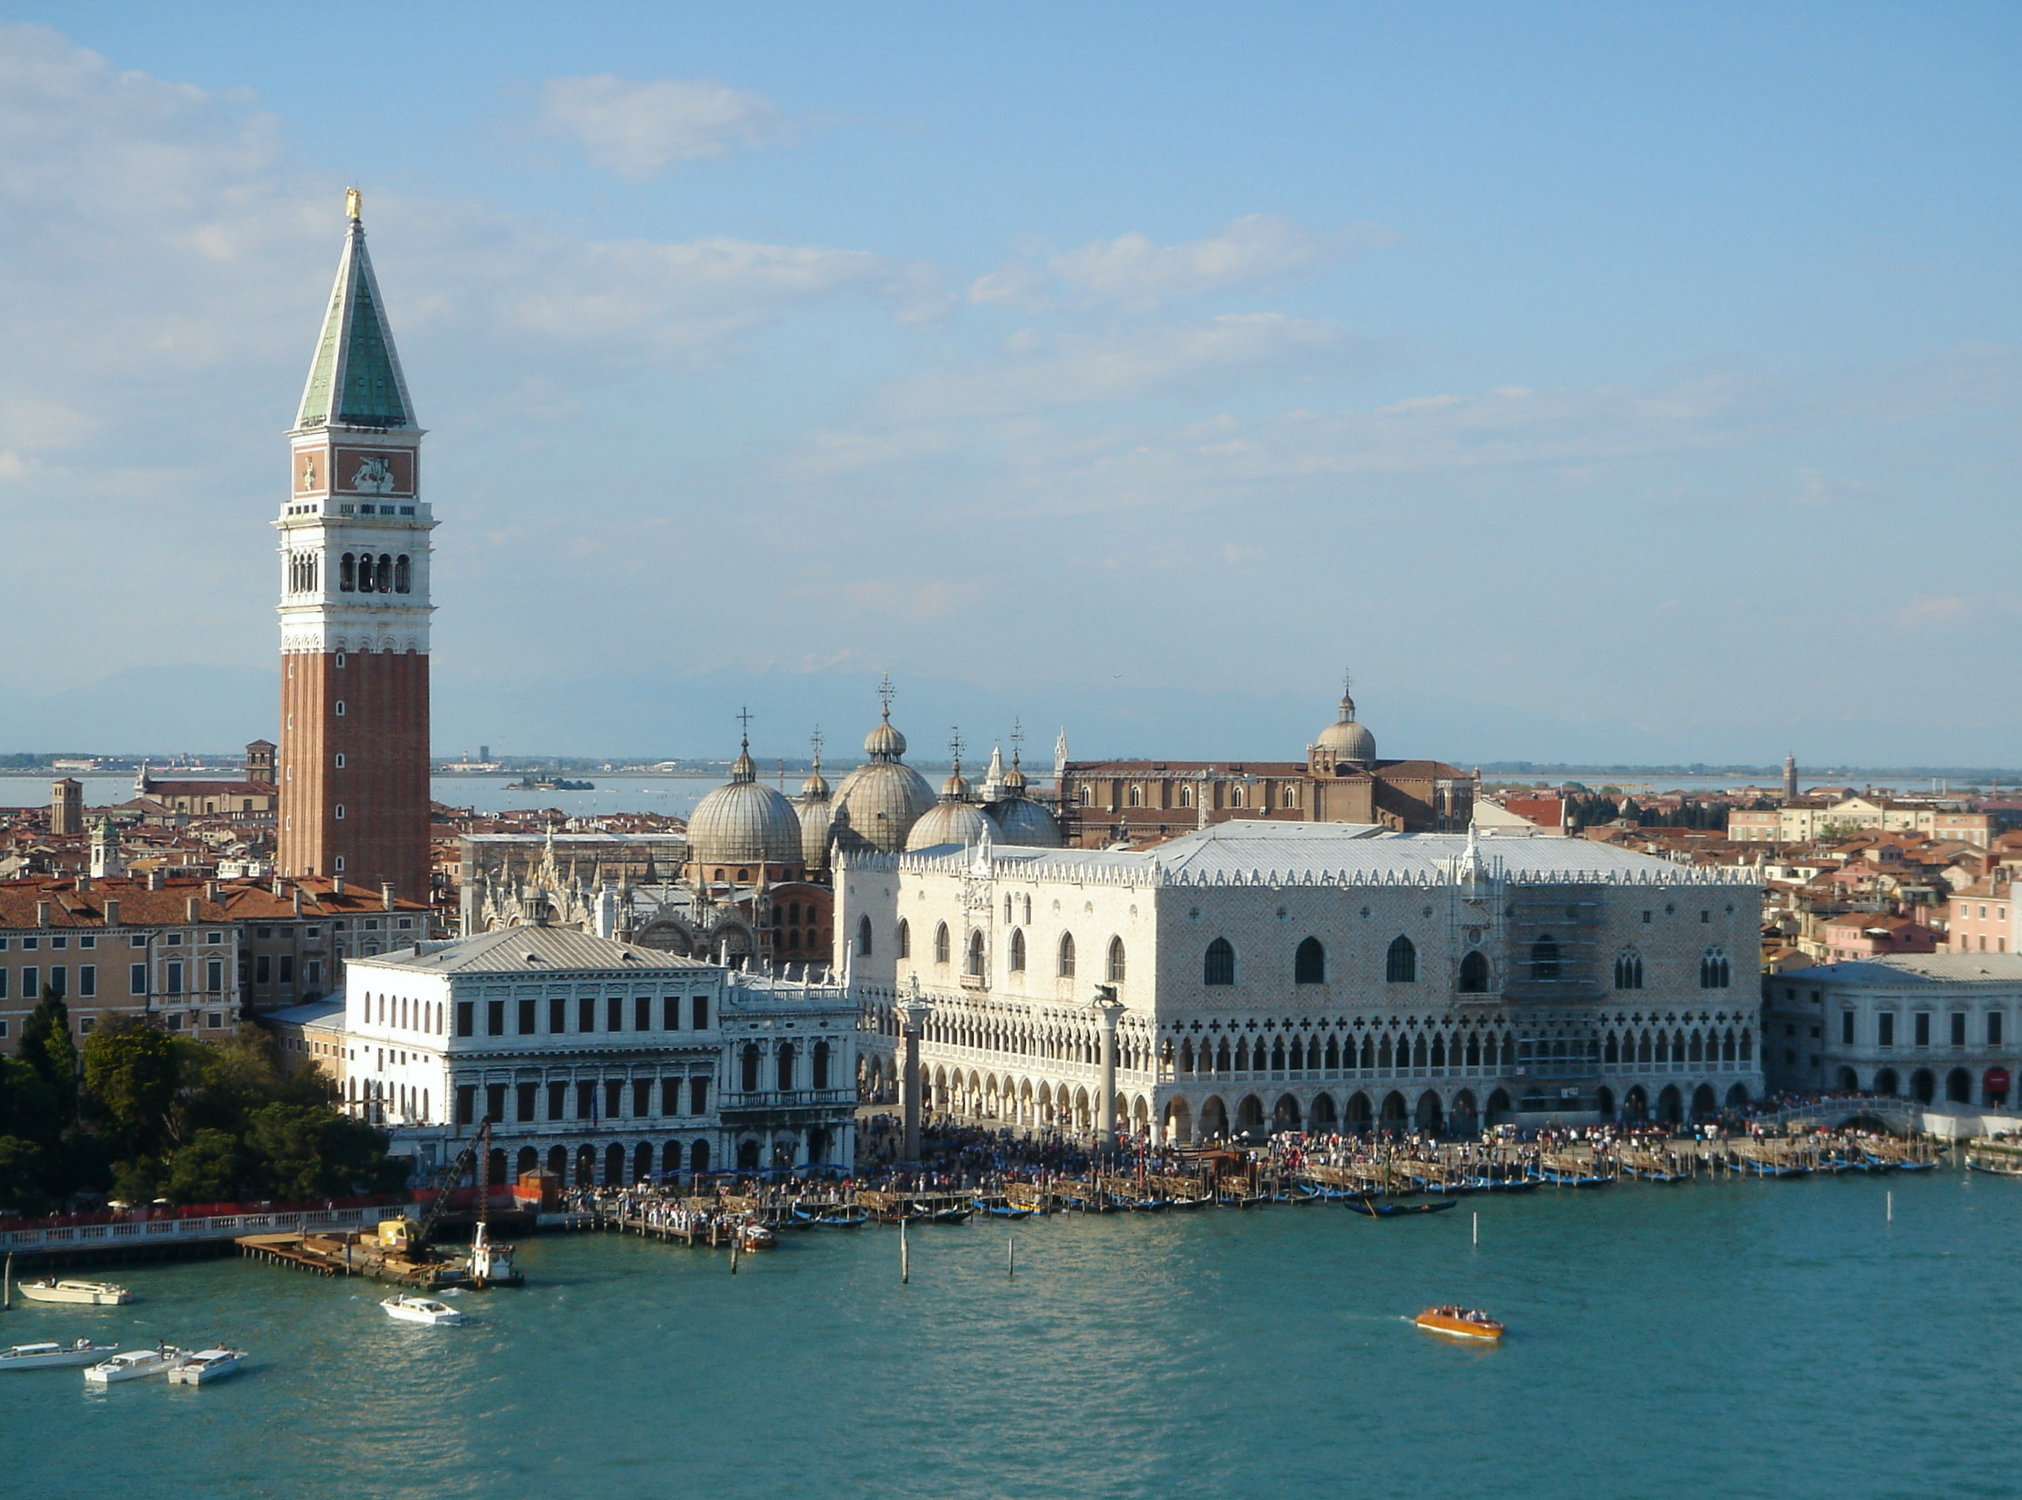 venice-view-from-ship-4-2008.jpg